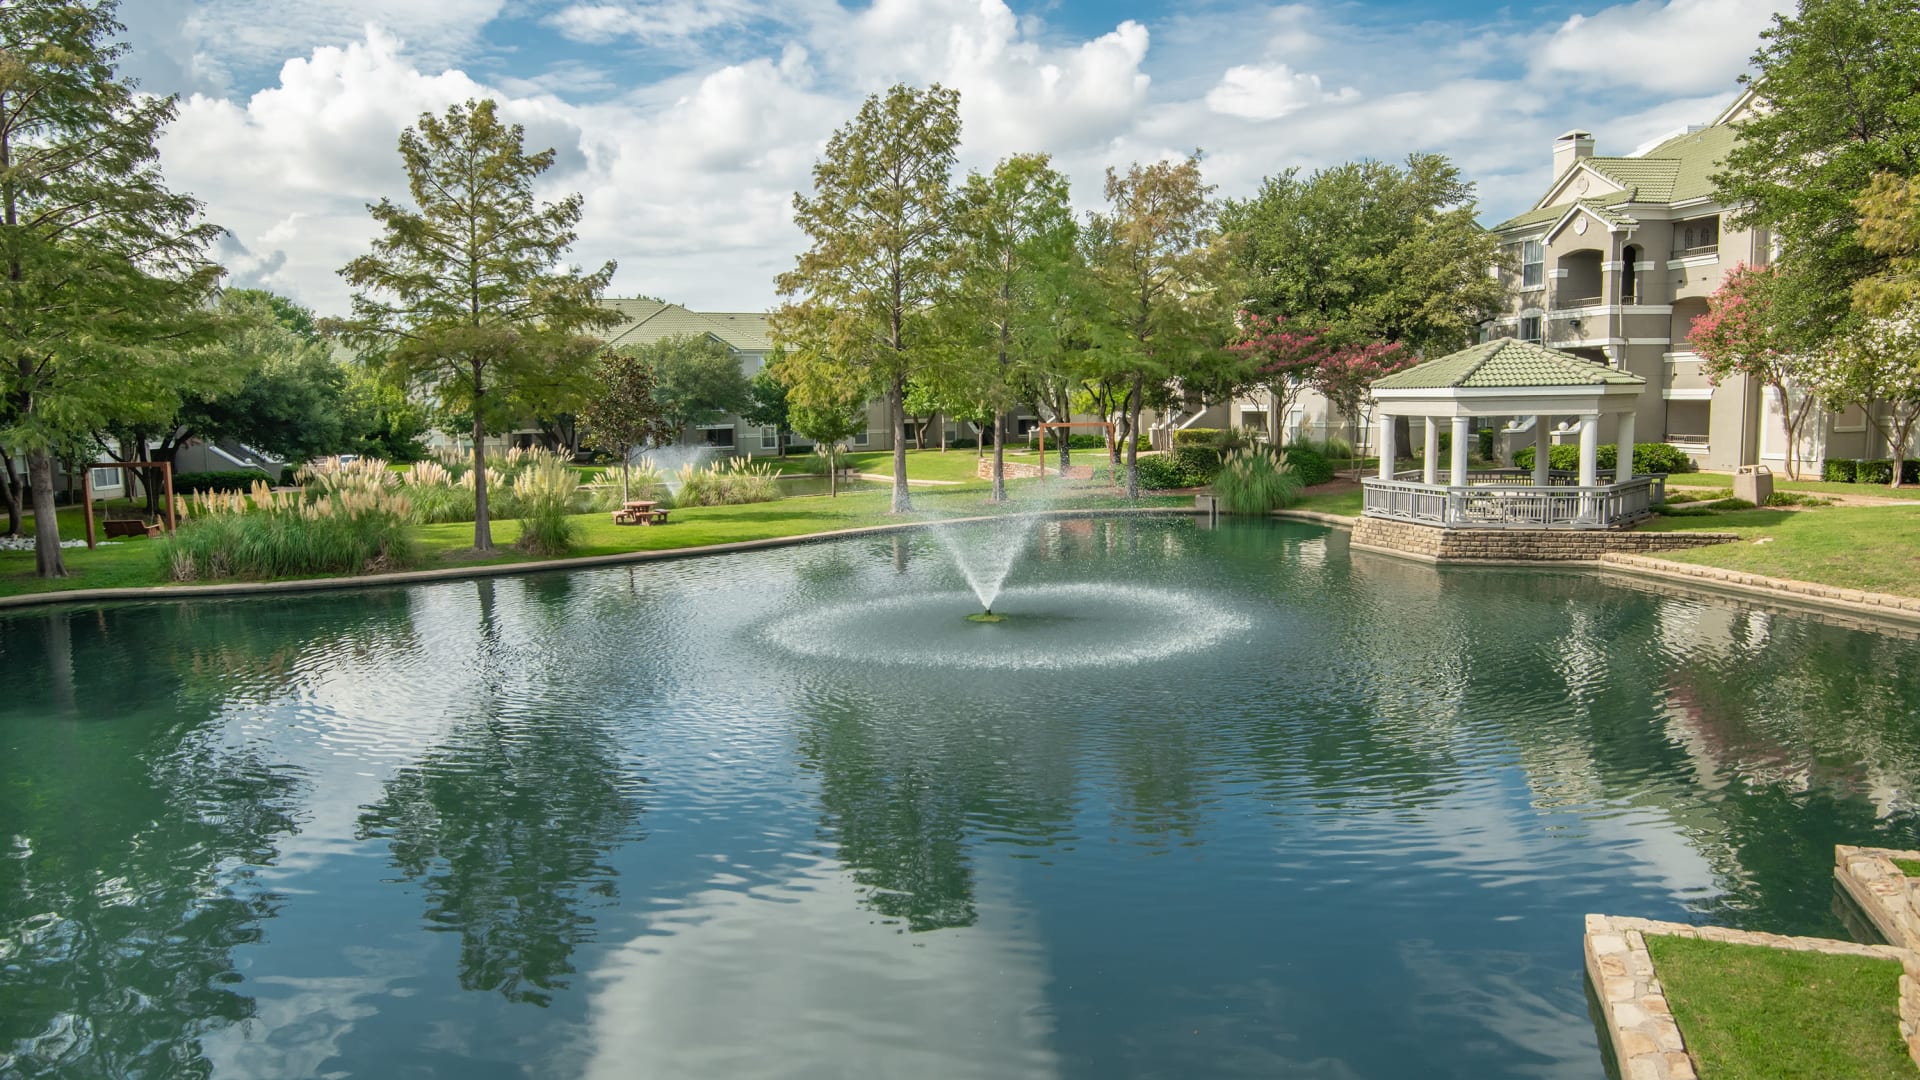 A luxury community with lake and fountains at Management Support 